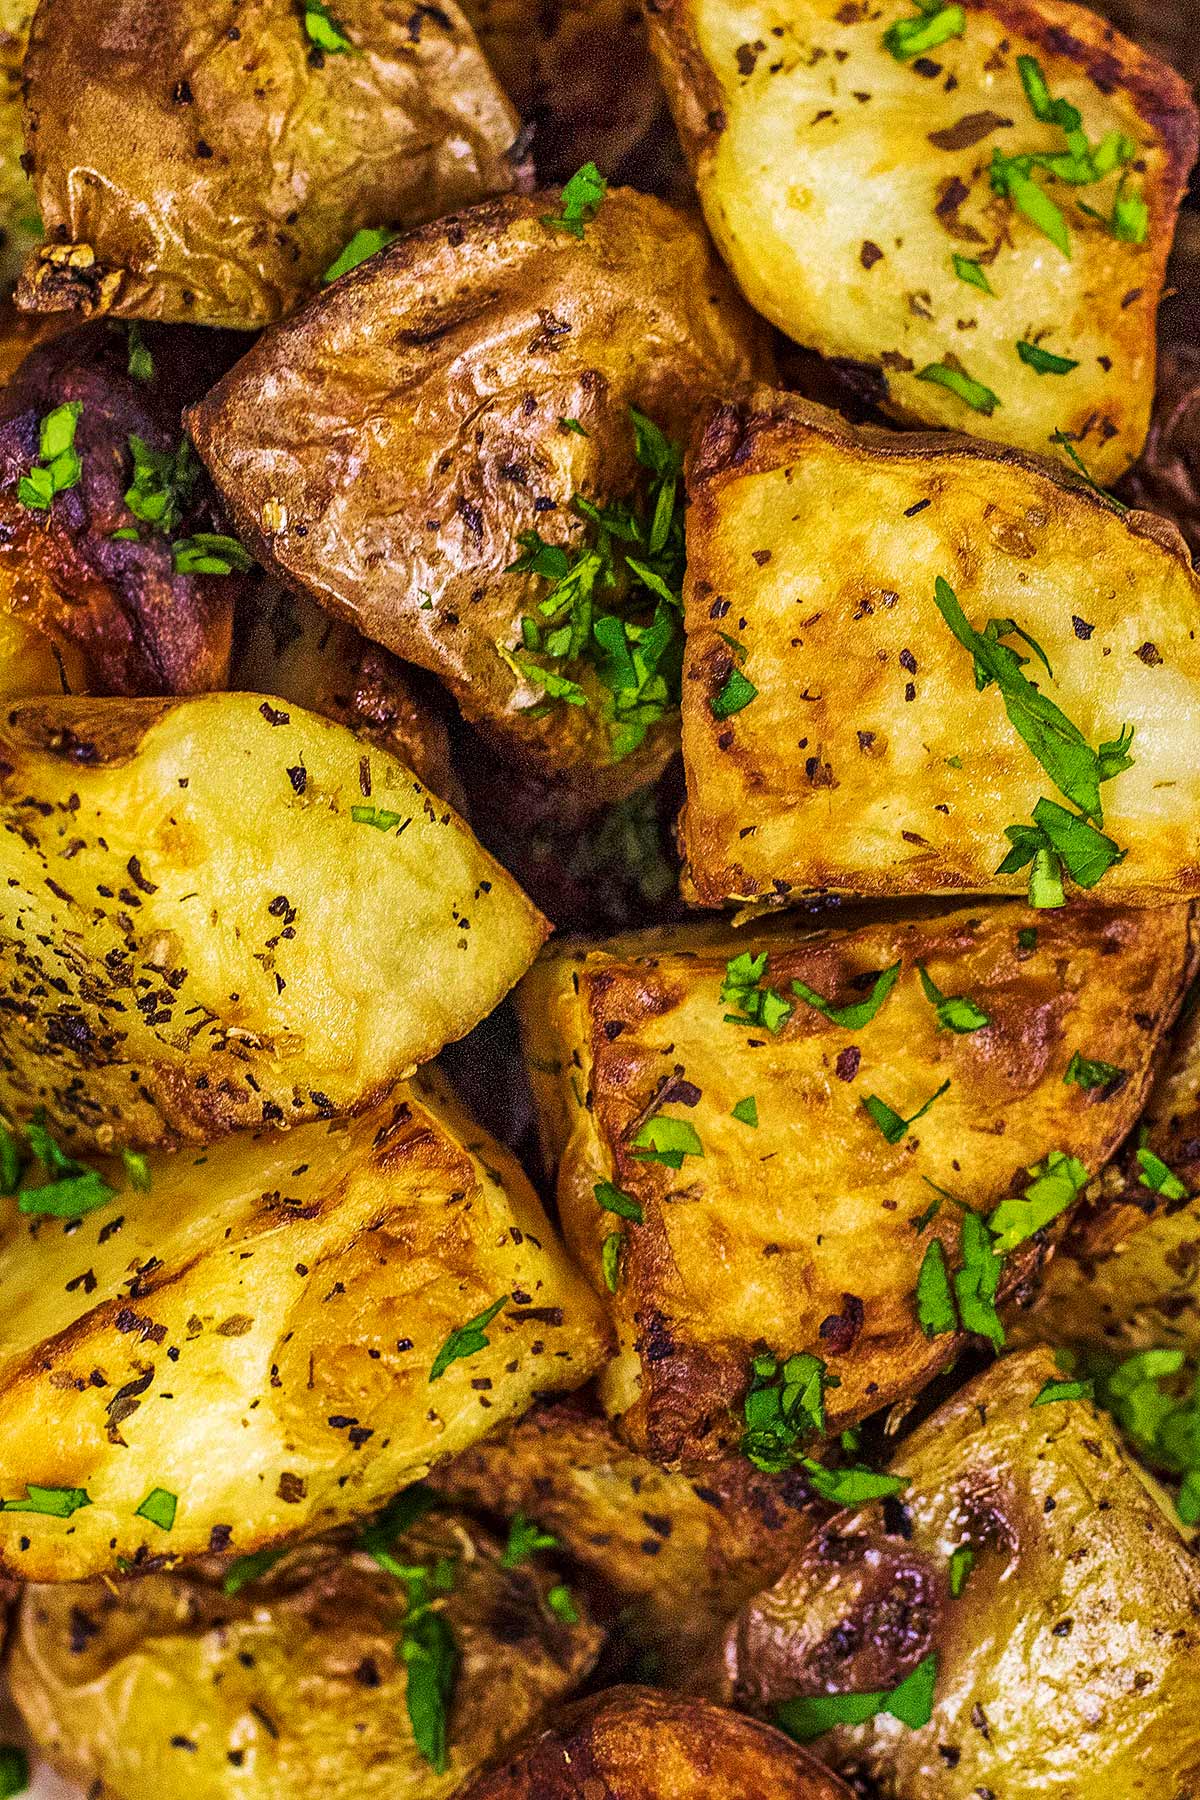 Roasted potatoes with chopped herbs sprinkled over them.